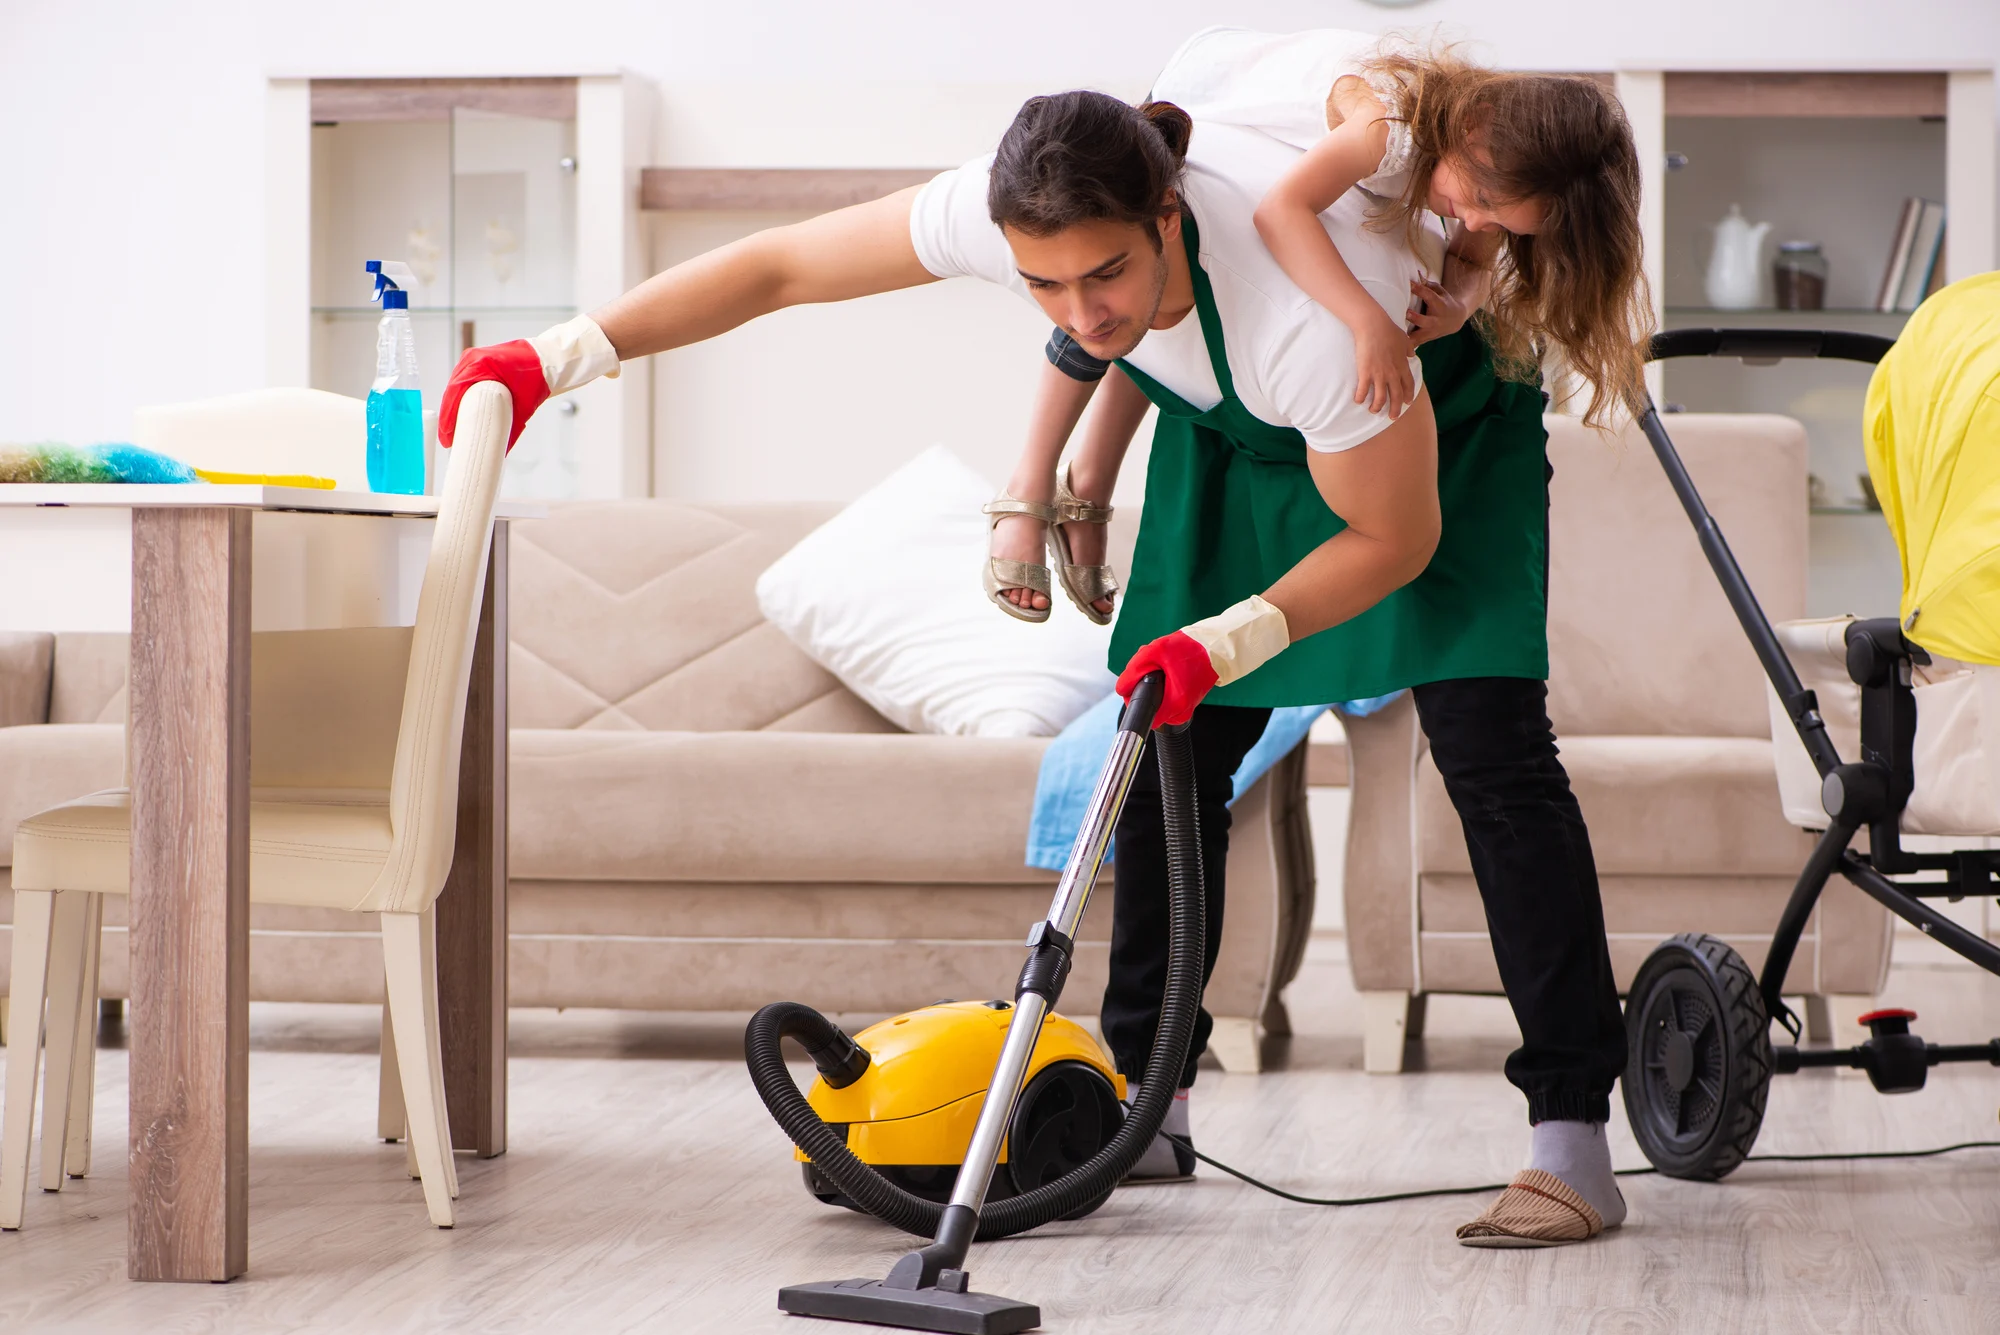 How Doing Household Chores Strengthens the Family Bond - CyberParent